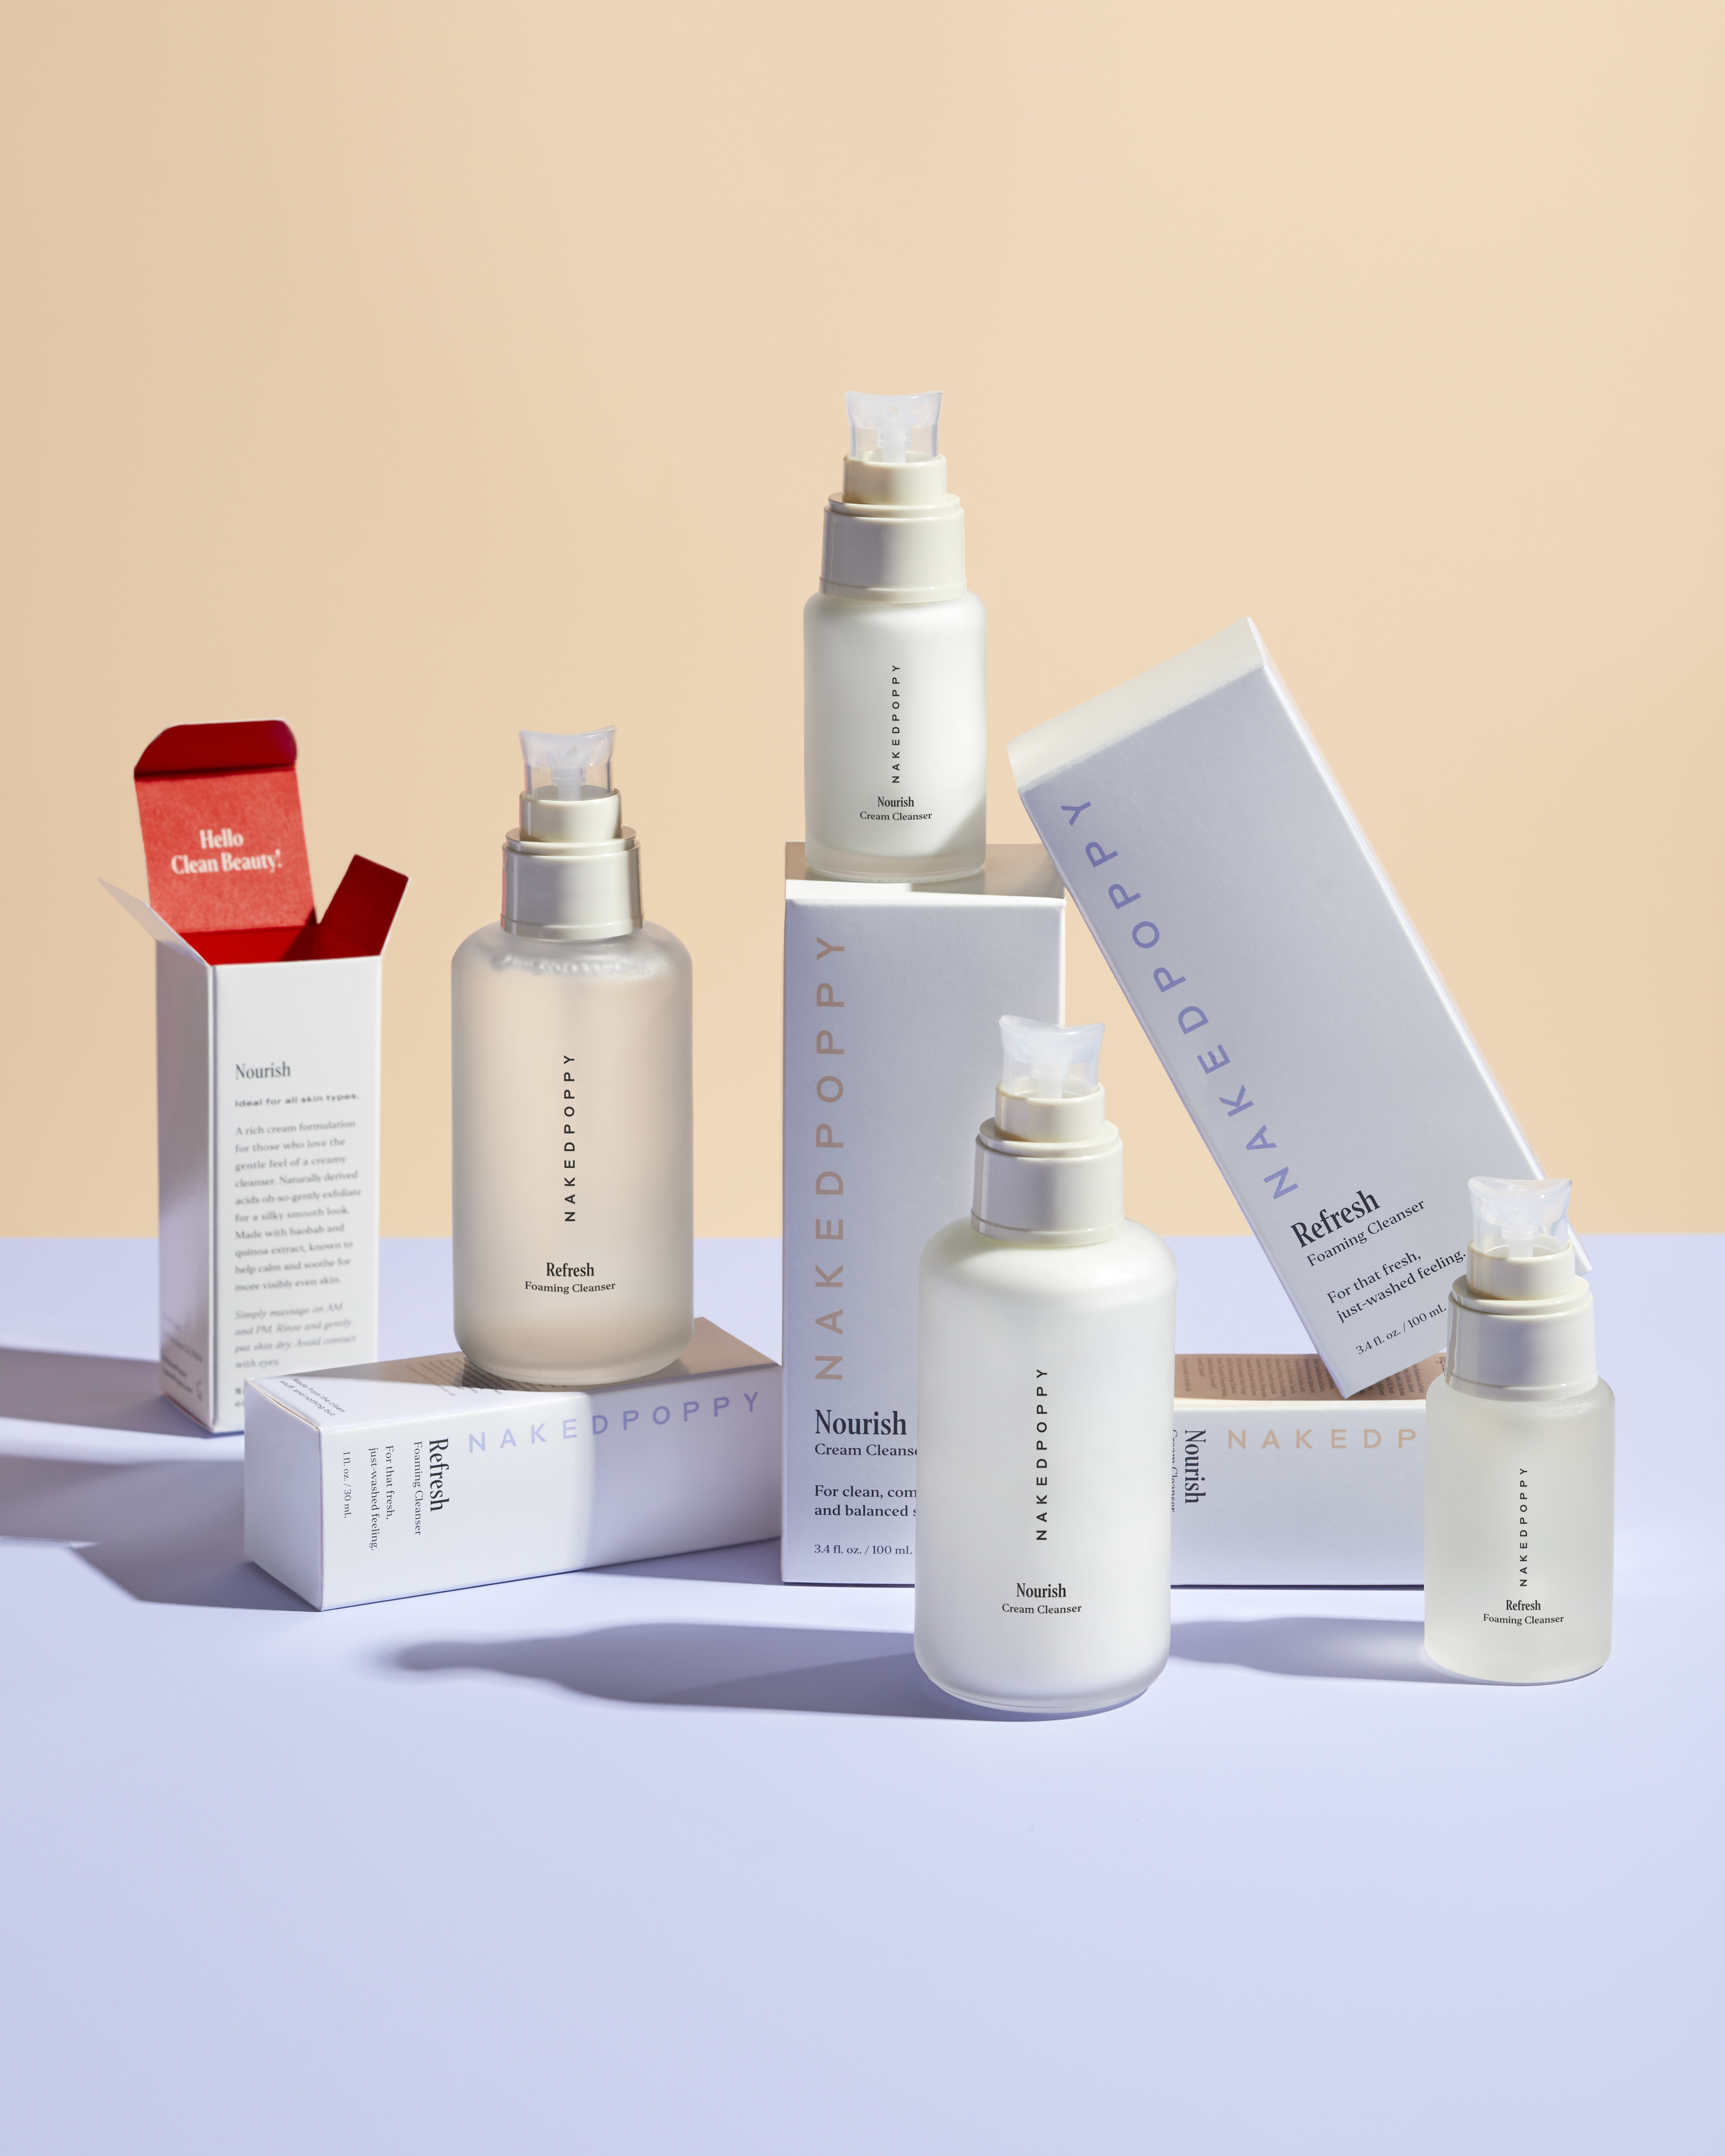 NakedPoppy Cleansers: A Clean Skincare Brand Where Less Is More